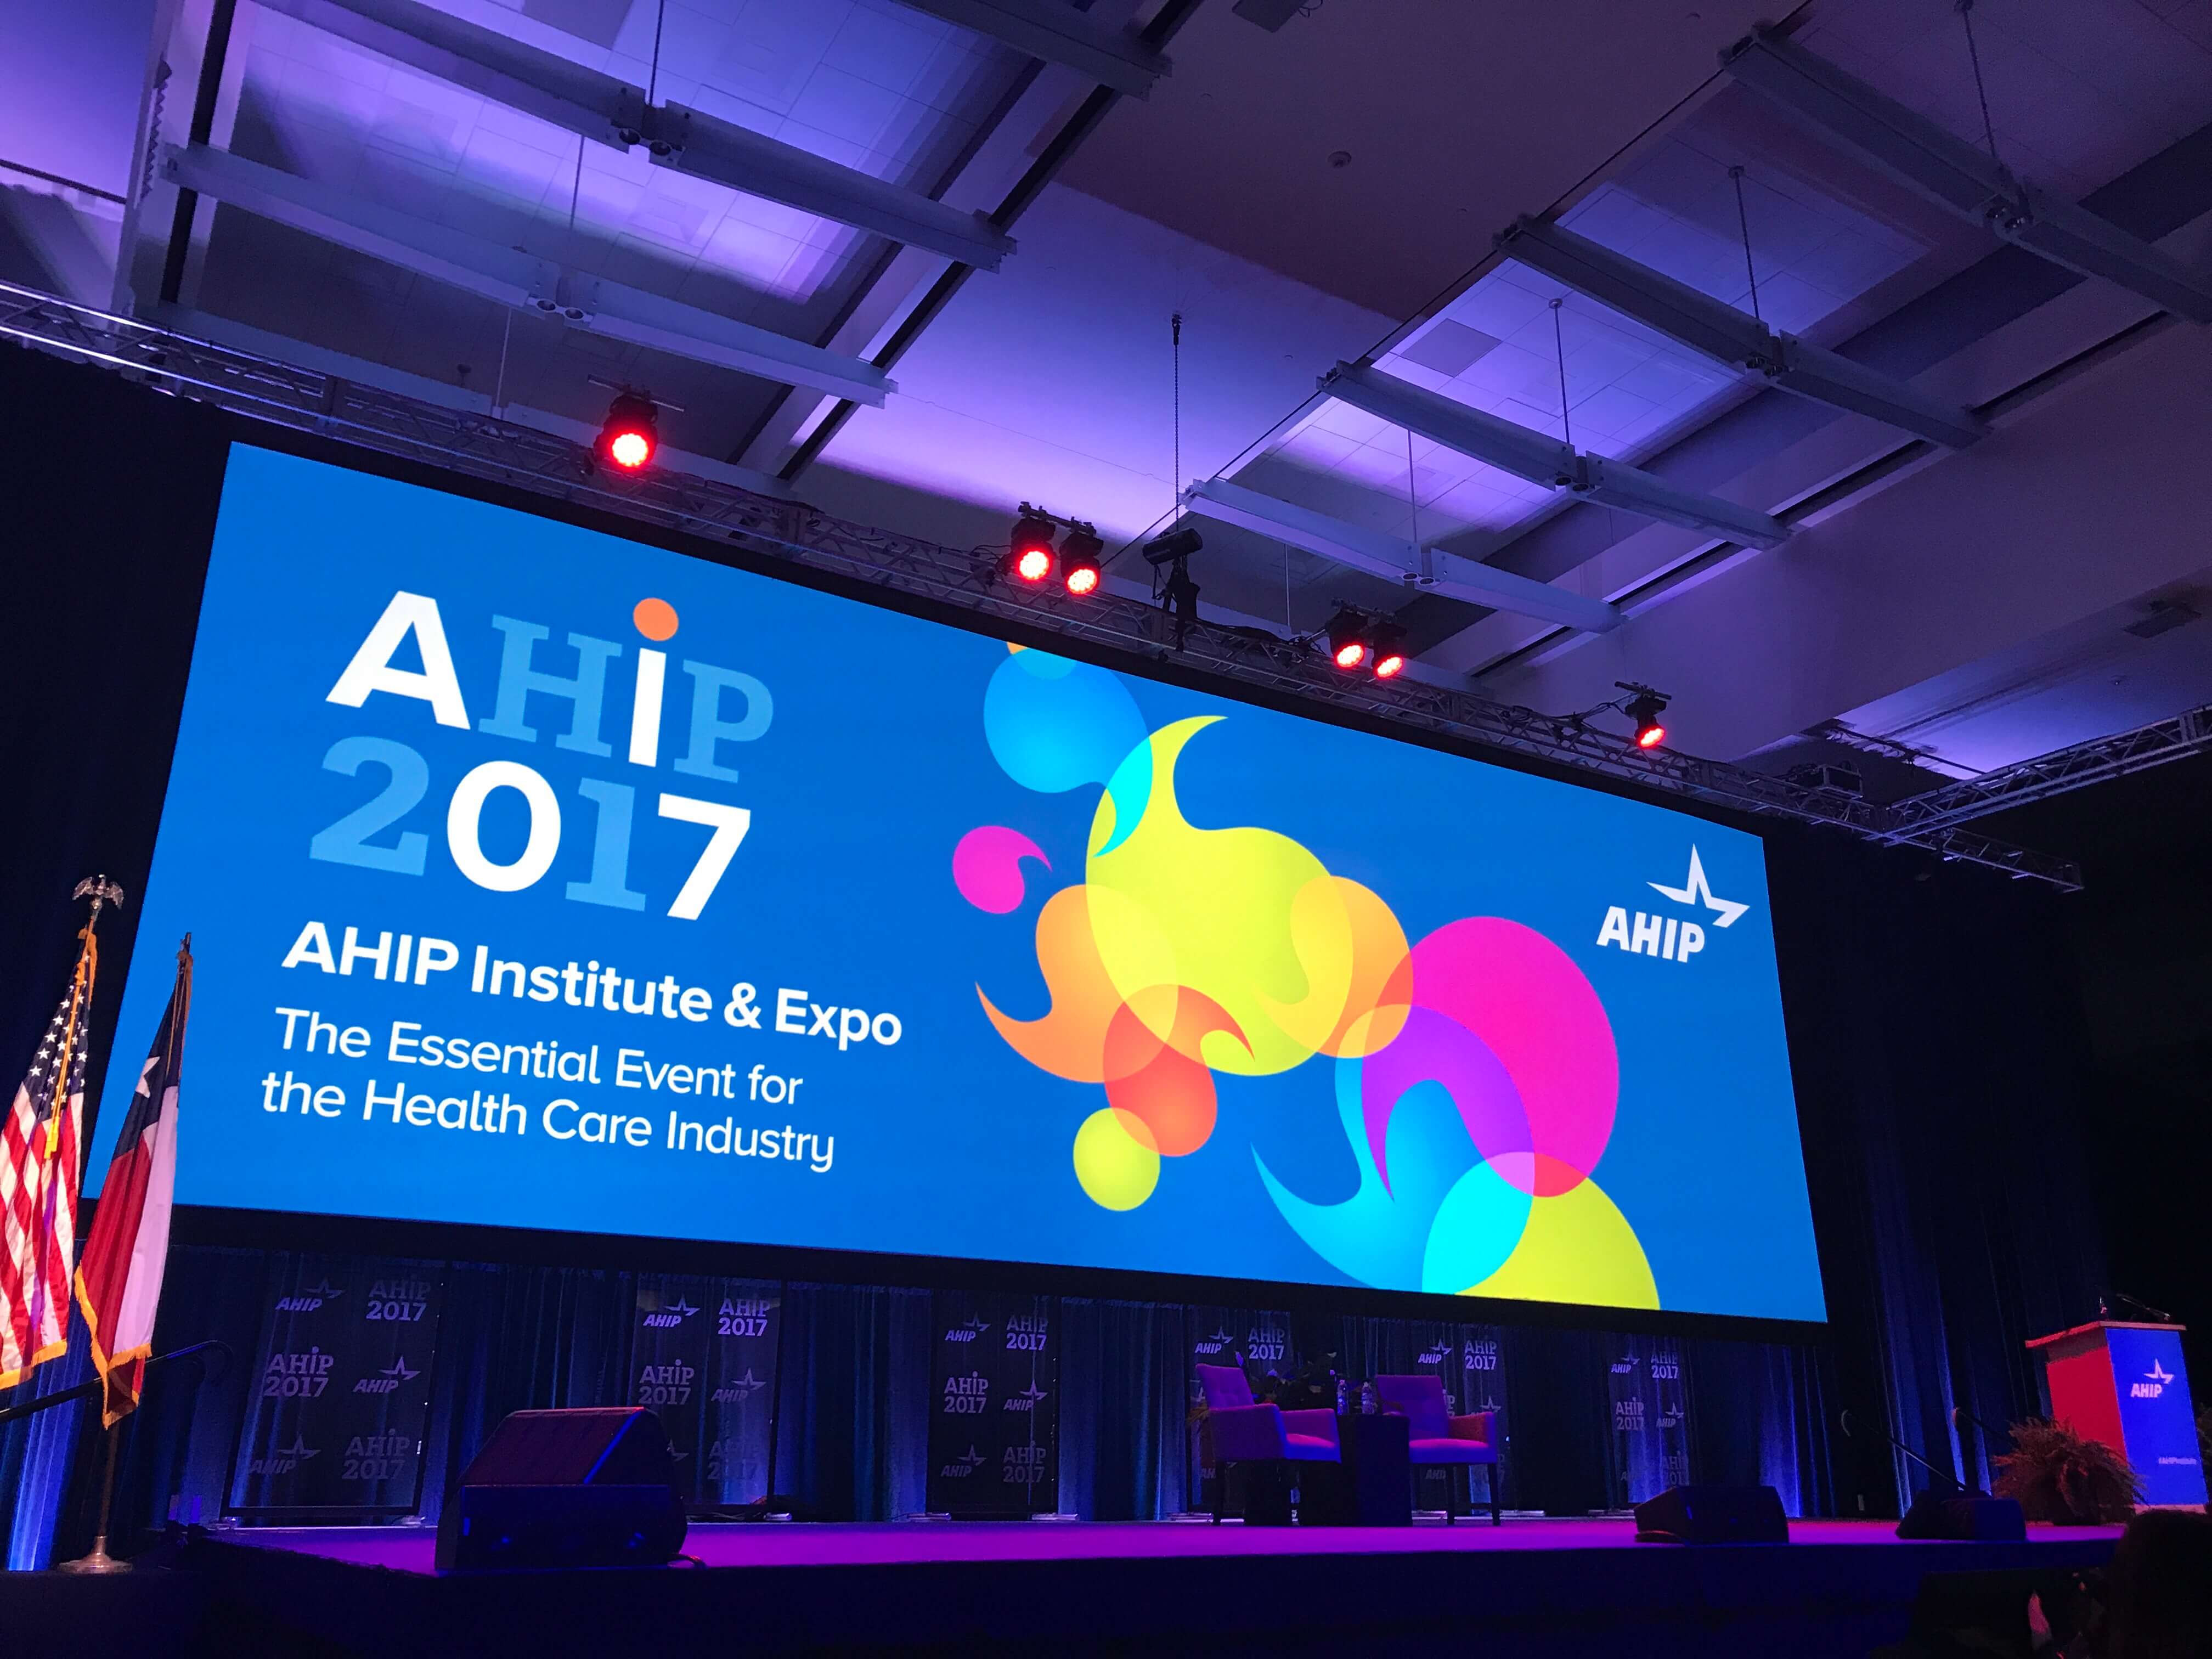 AHIP Institute  Expo stage